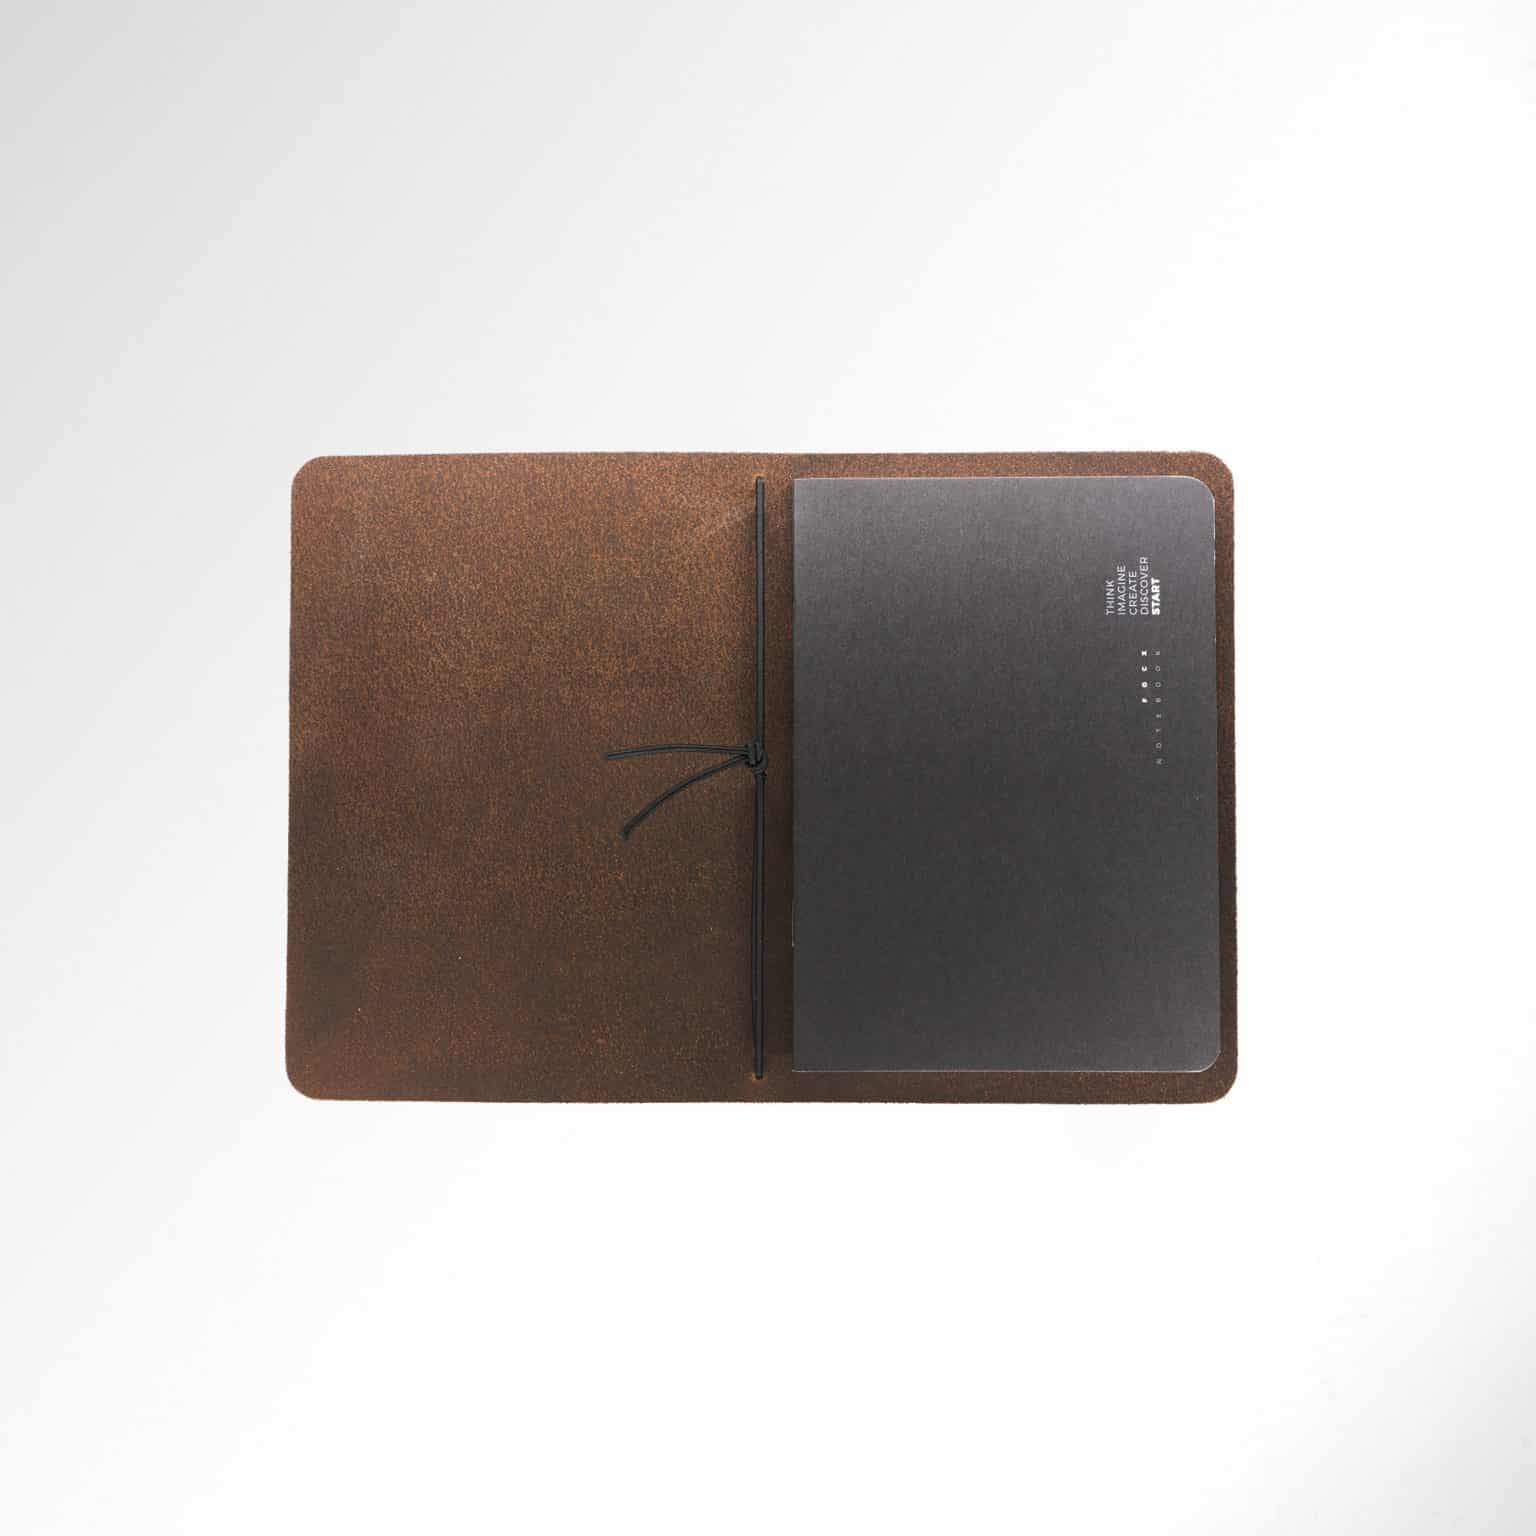 Compact wallet designed for essential conservazione